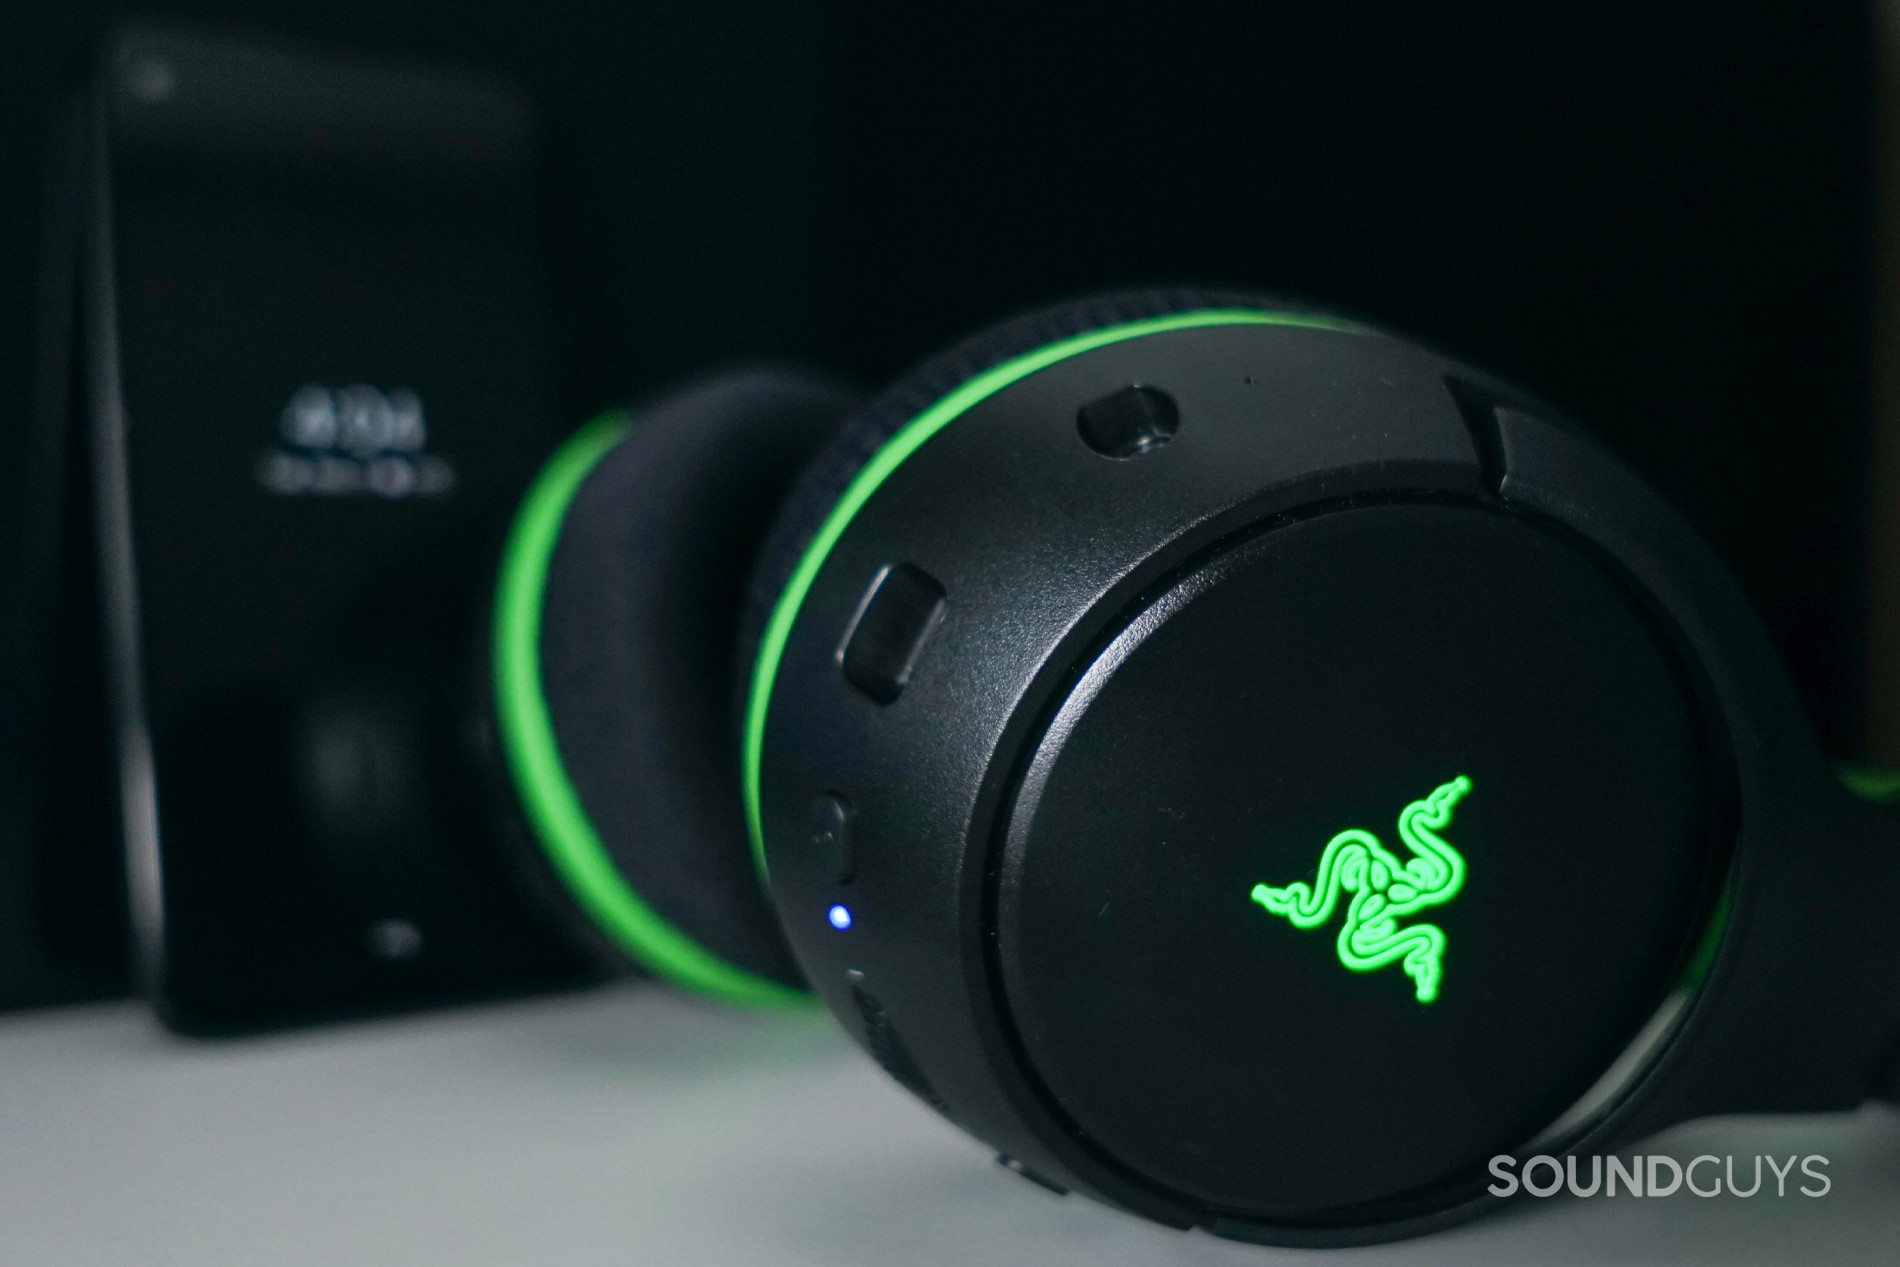 The Razer Kaira Pro gaming headset sits on a shelf in front of a Google Pixel 4a.